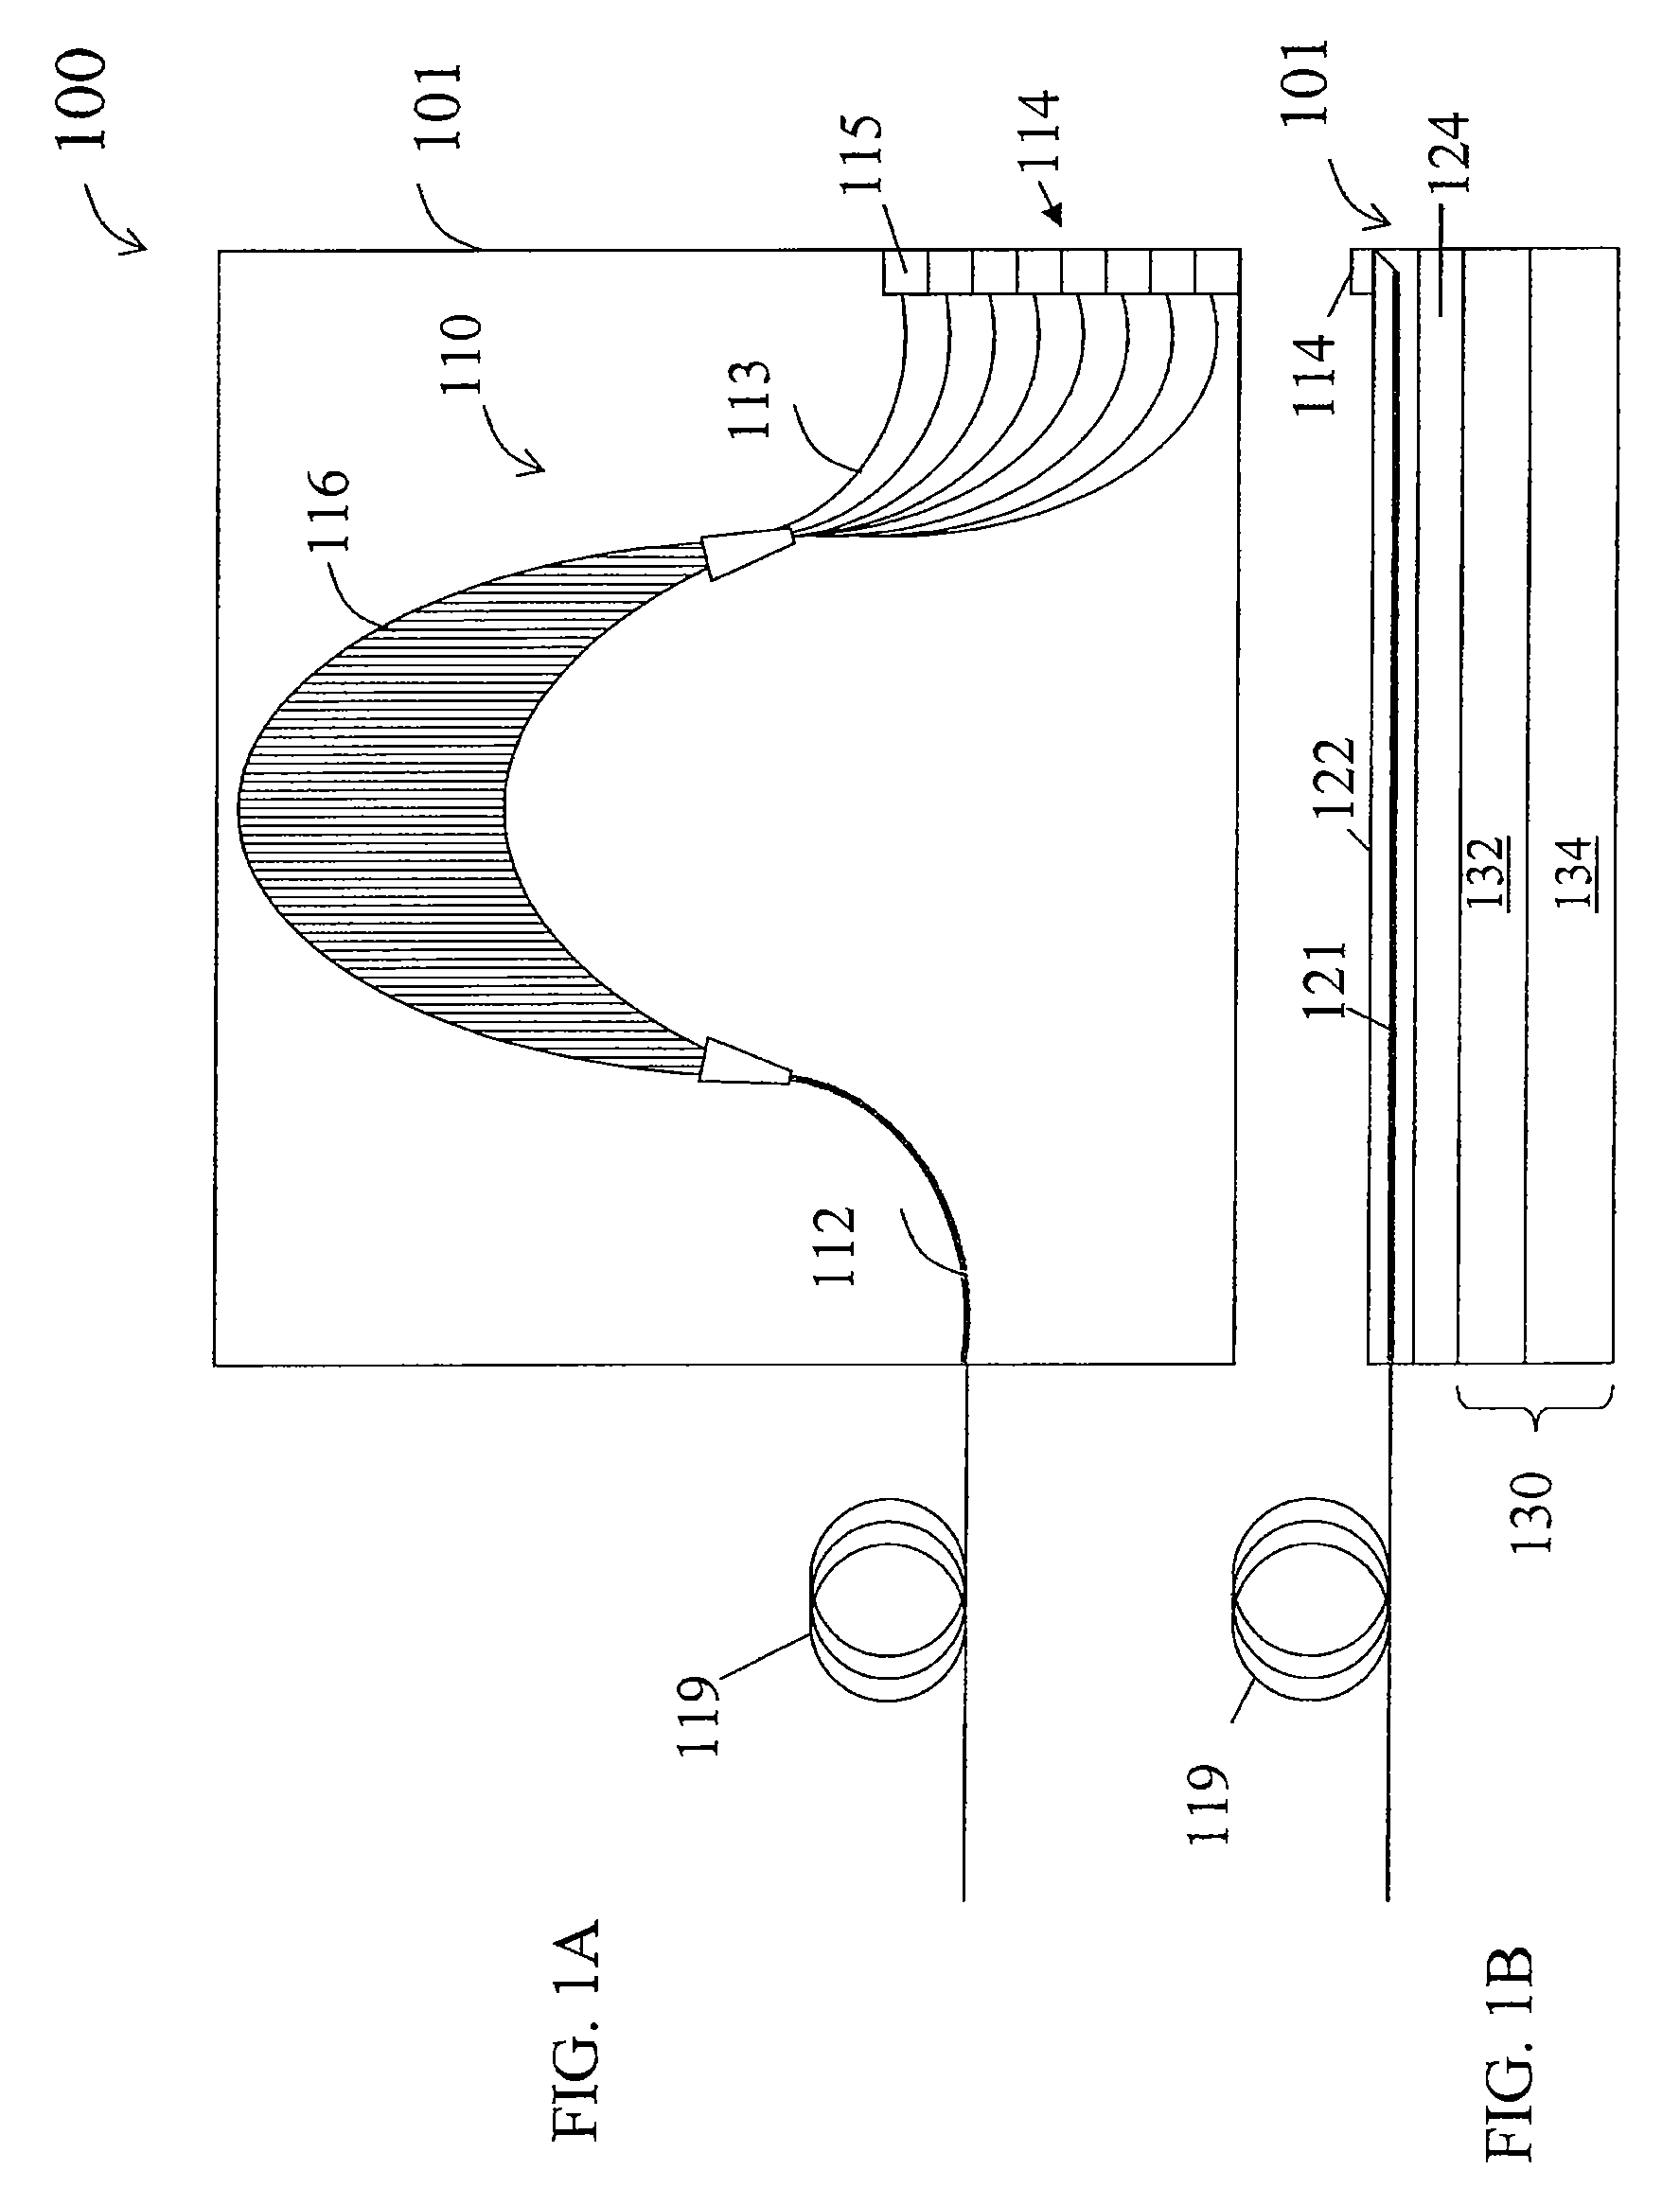 Method and system for integrated DWDM receivers